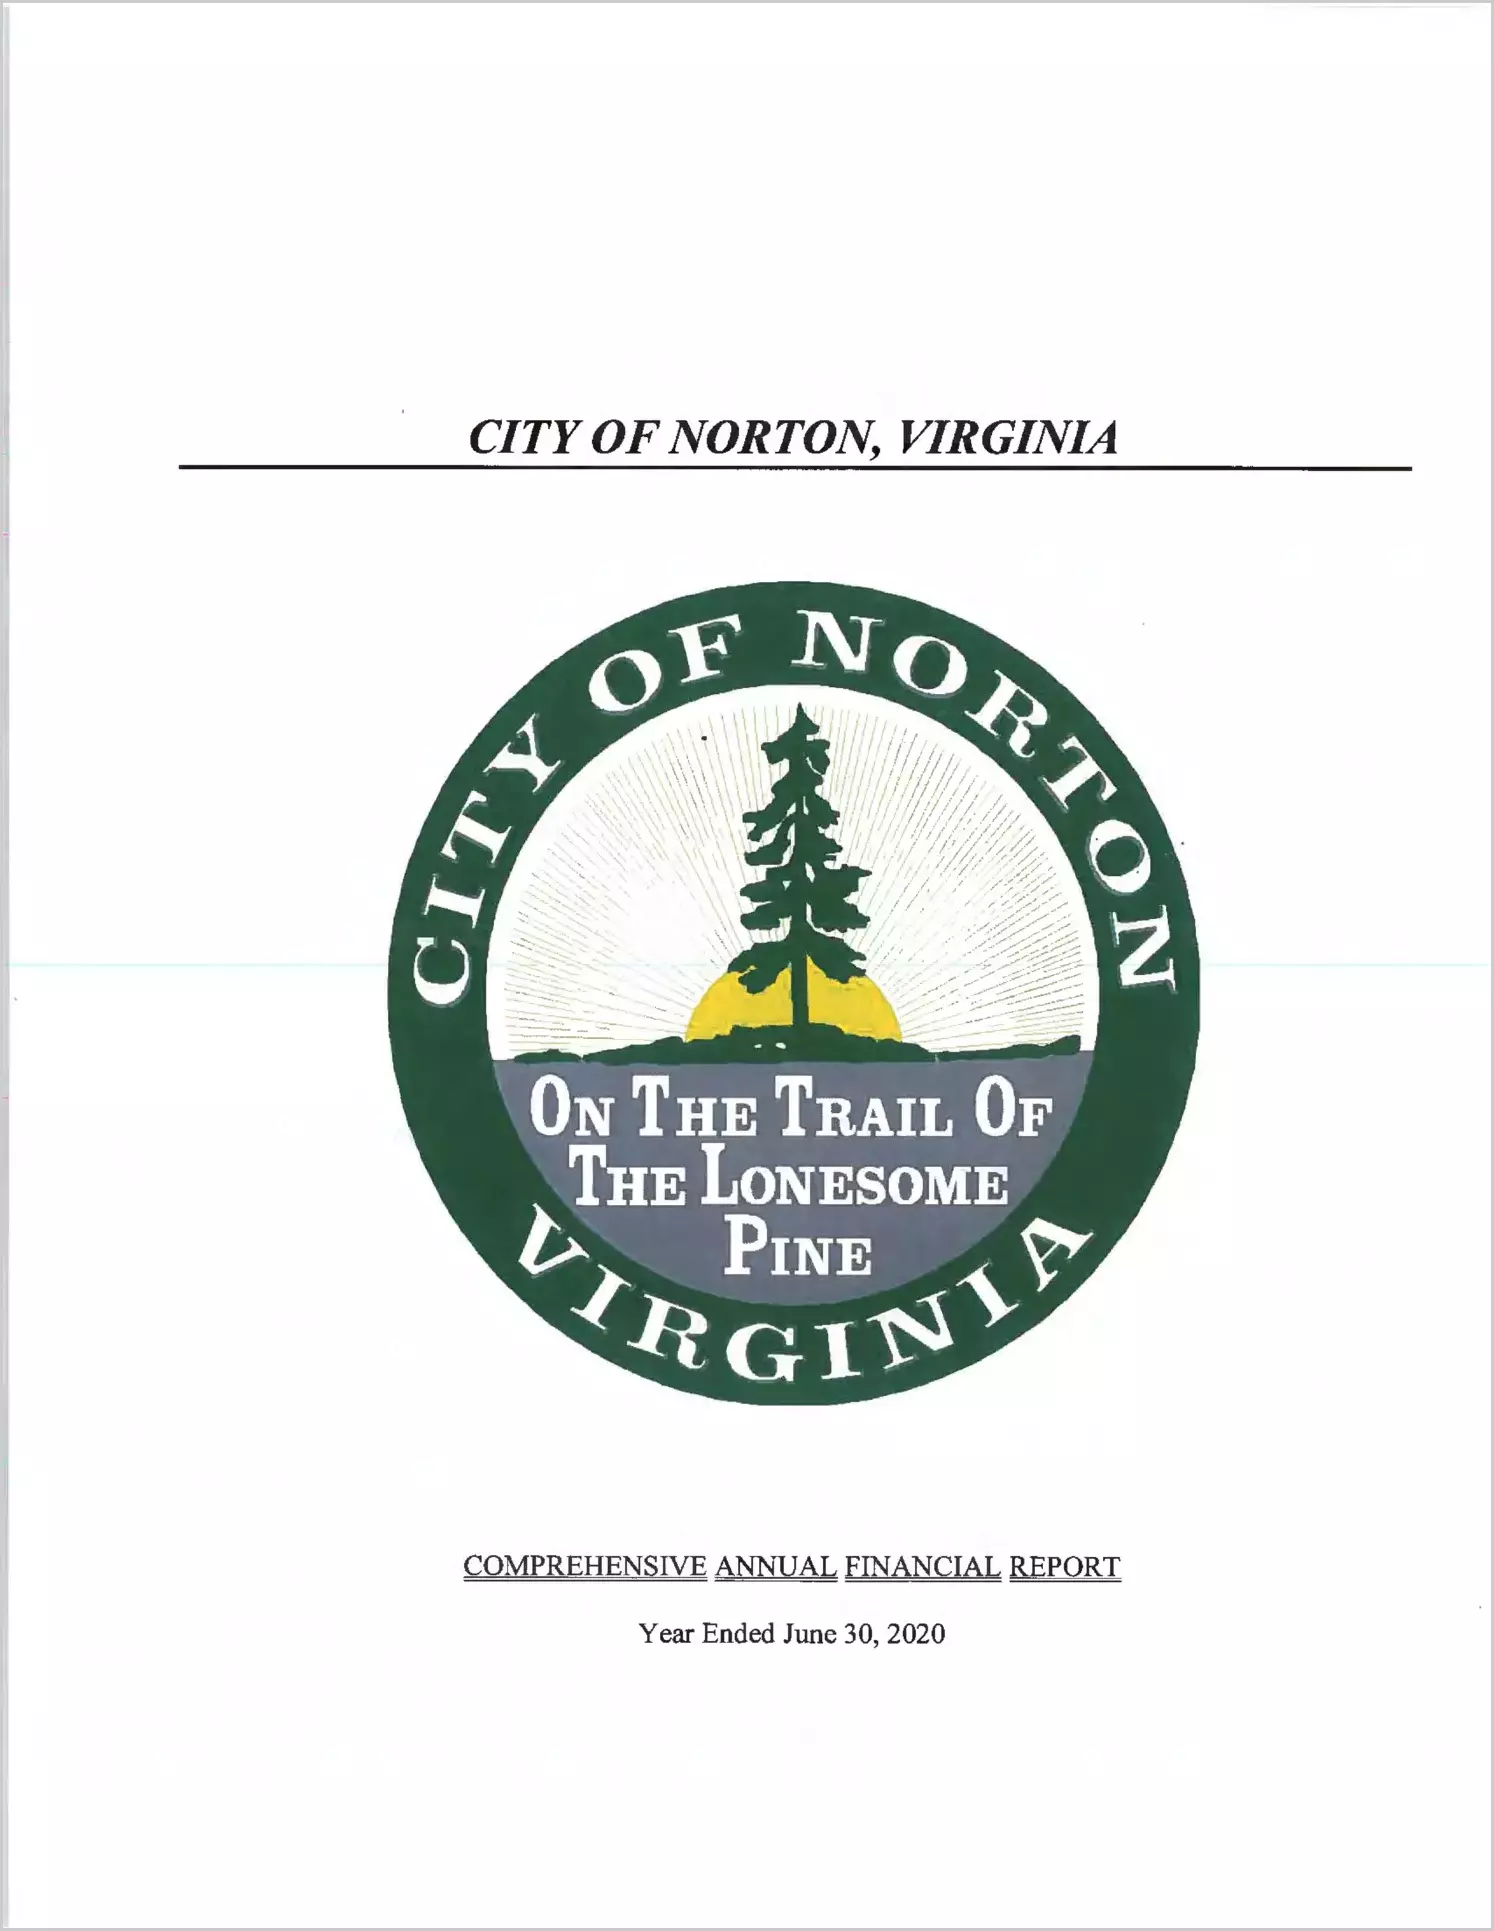 2020 Annual Financial Report for City of Norton